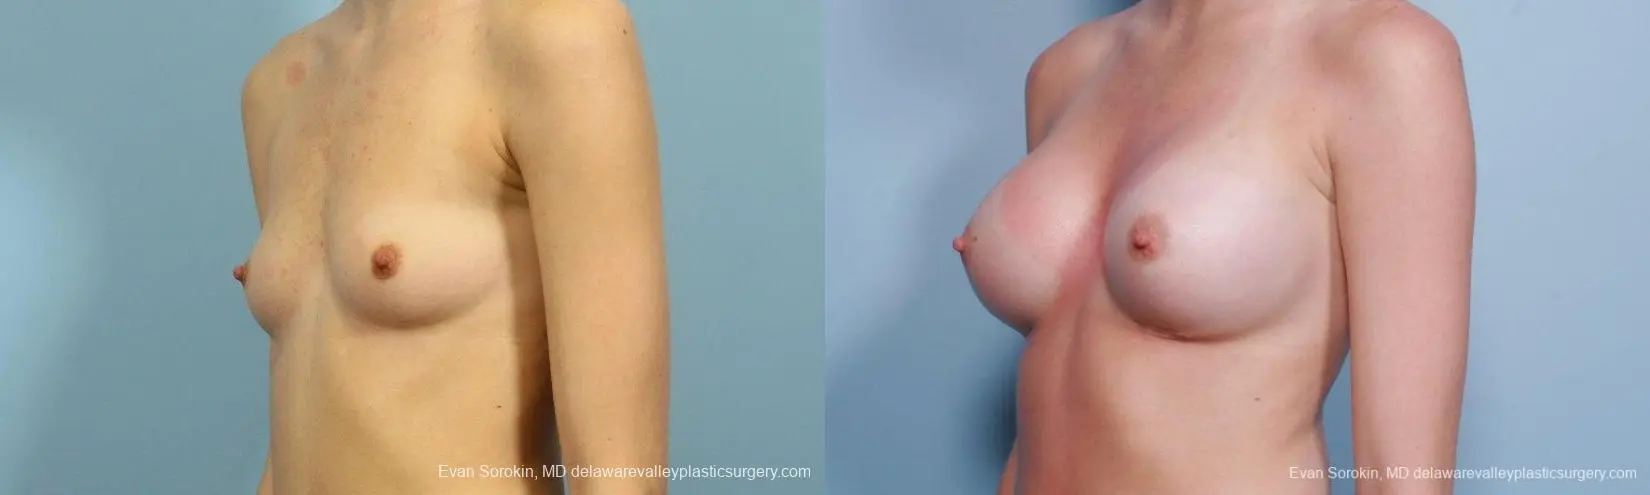 Philadelphia Breast Augmentation 8660 - Before and After 3